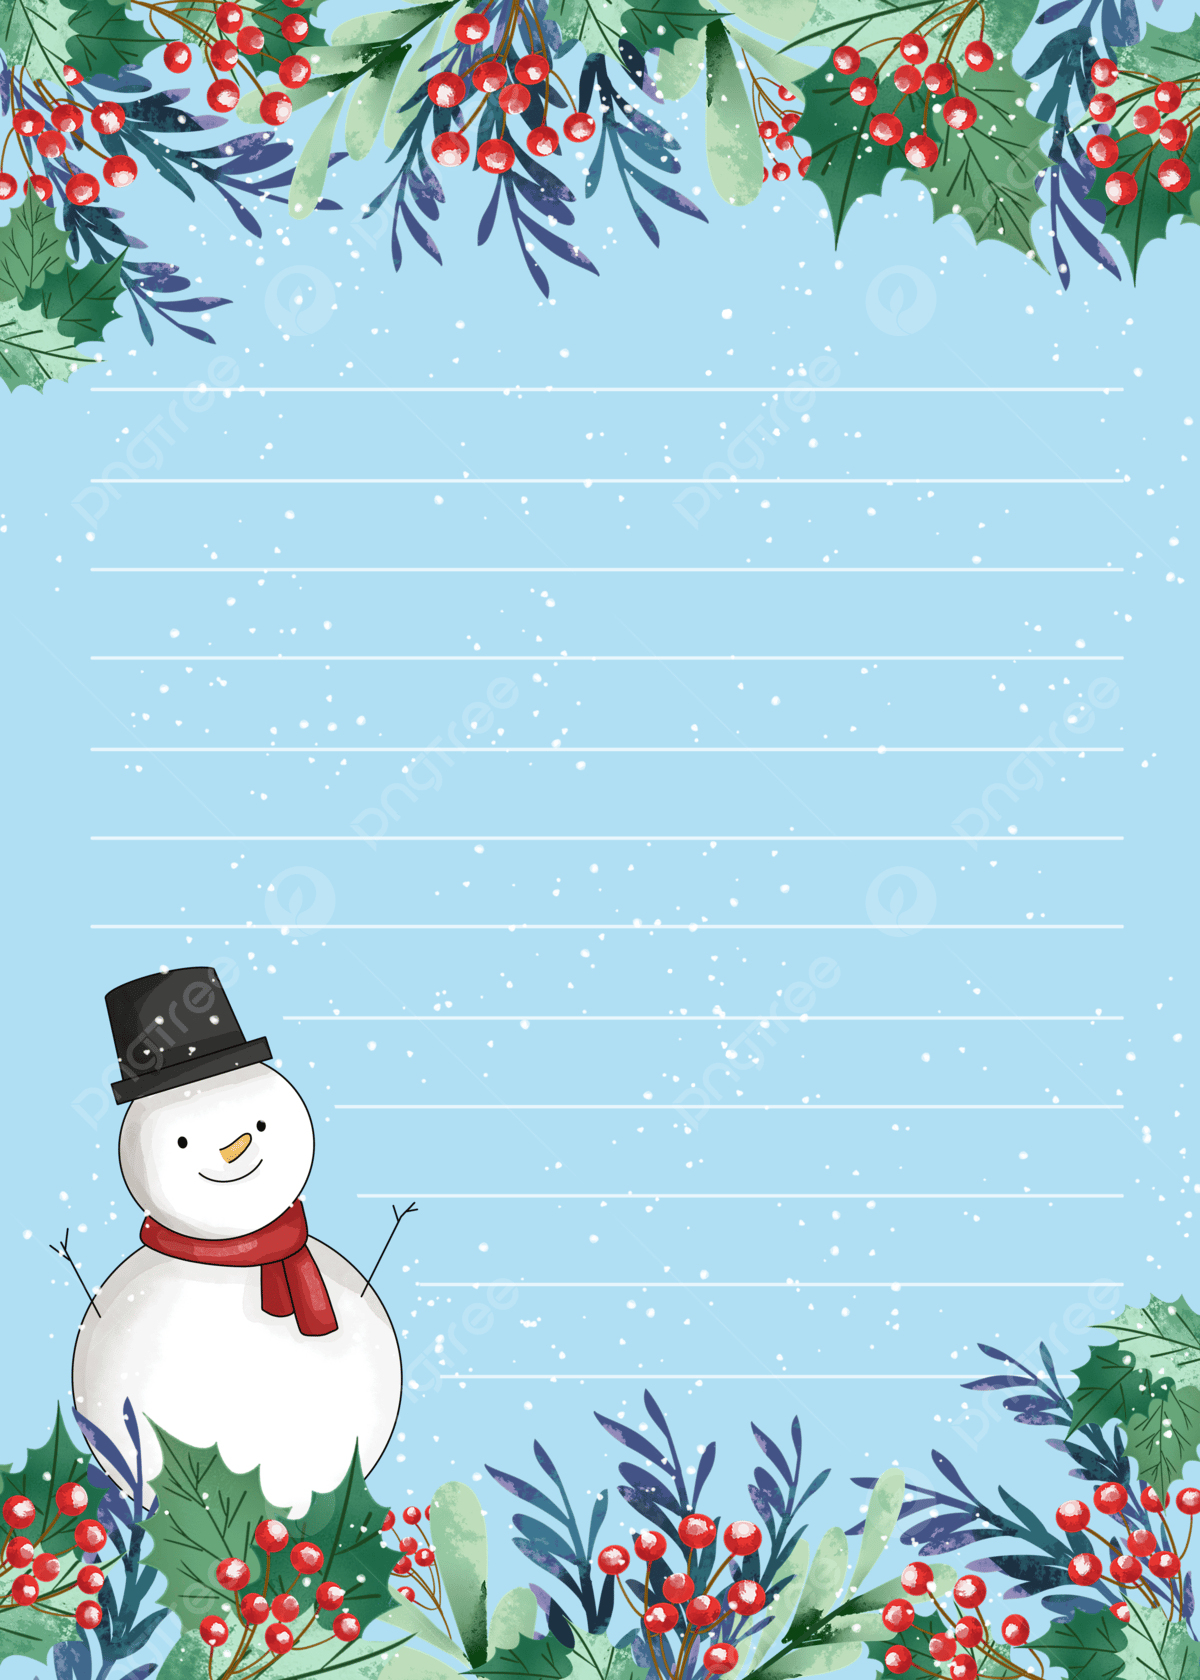 Christmas Blue Snowflake Plant Snowman Stationery Background - Snowman Stationary Free